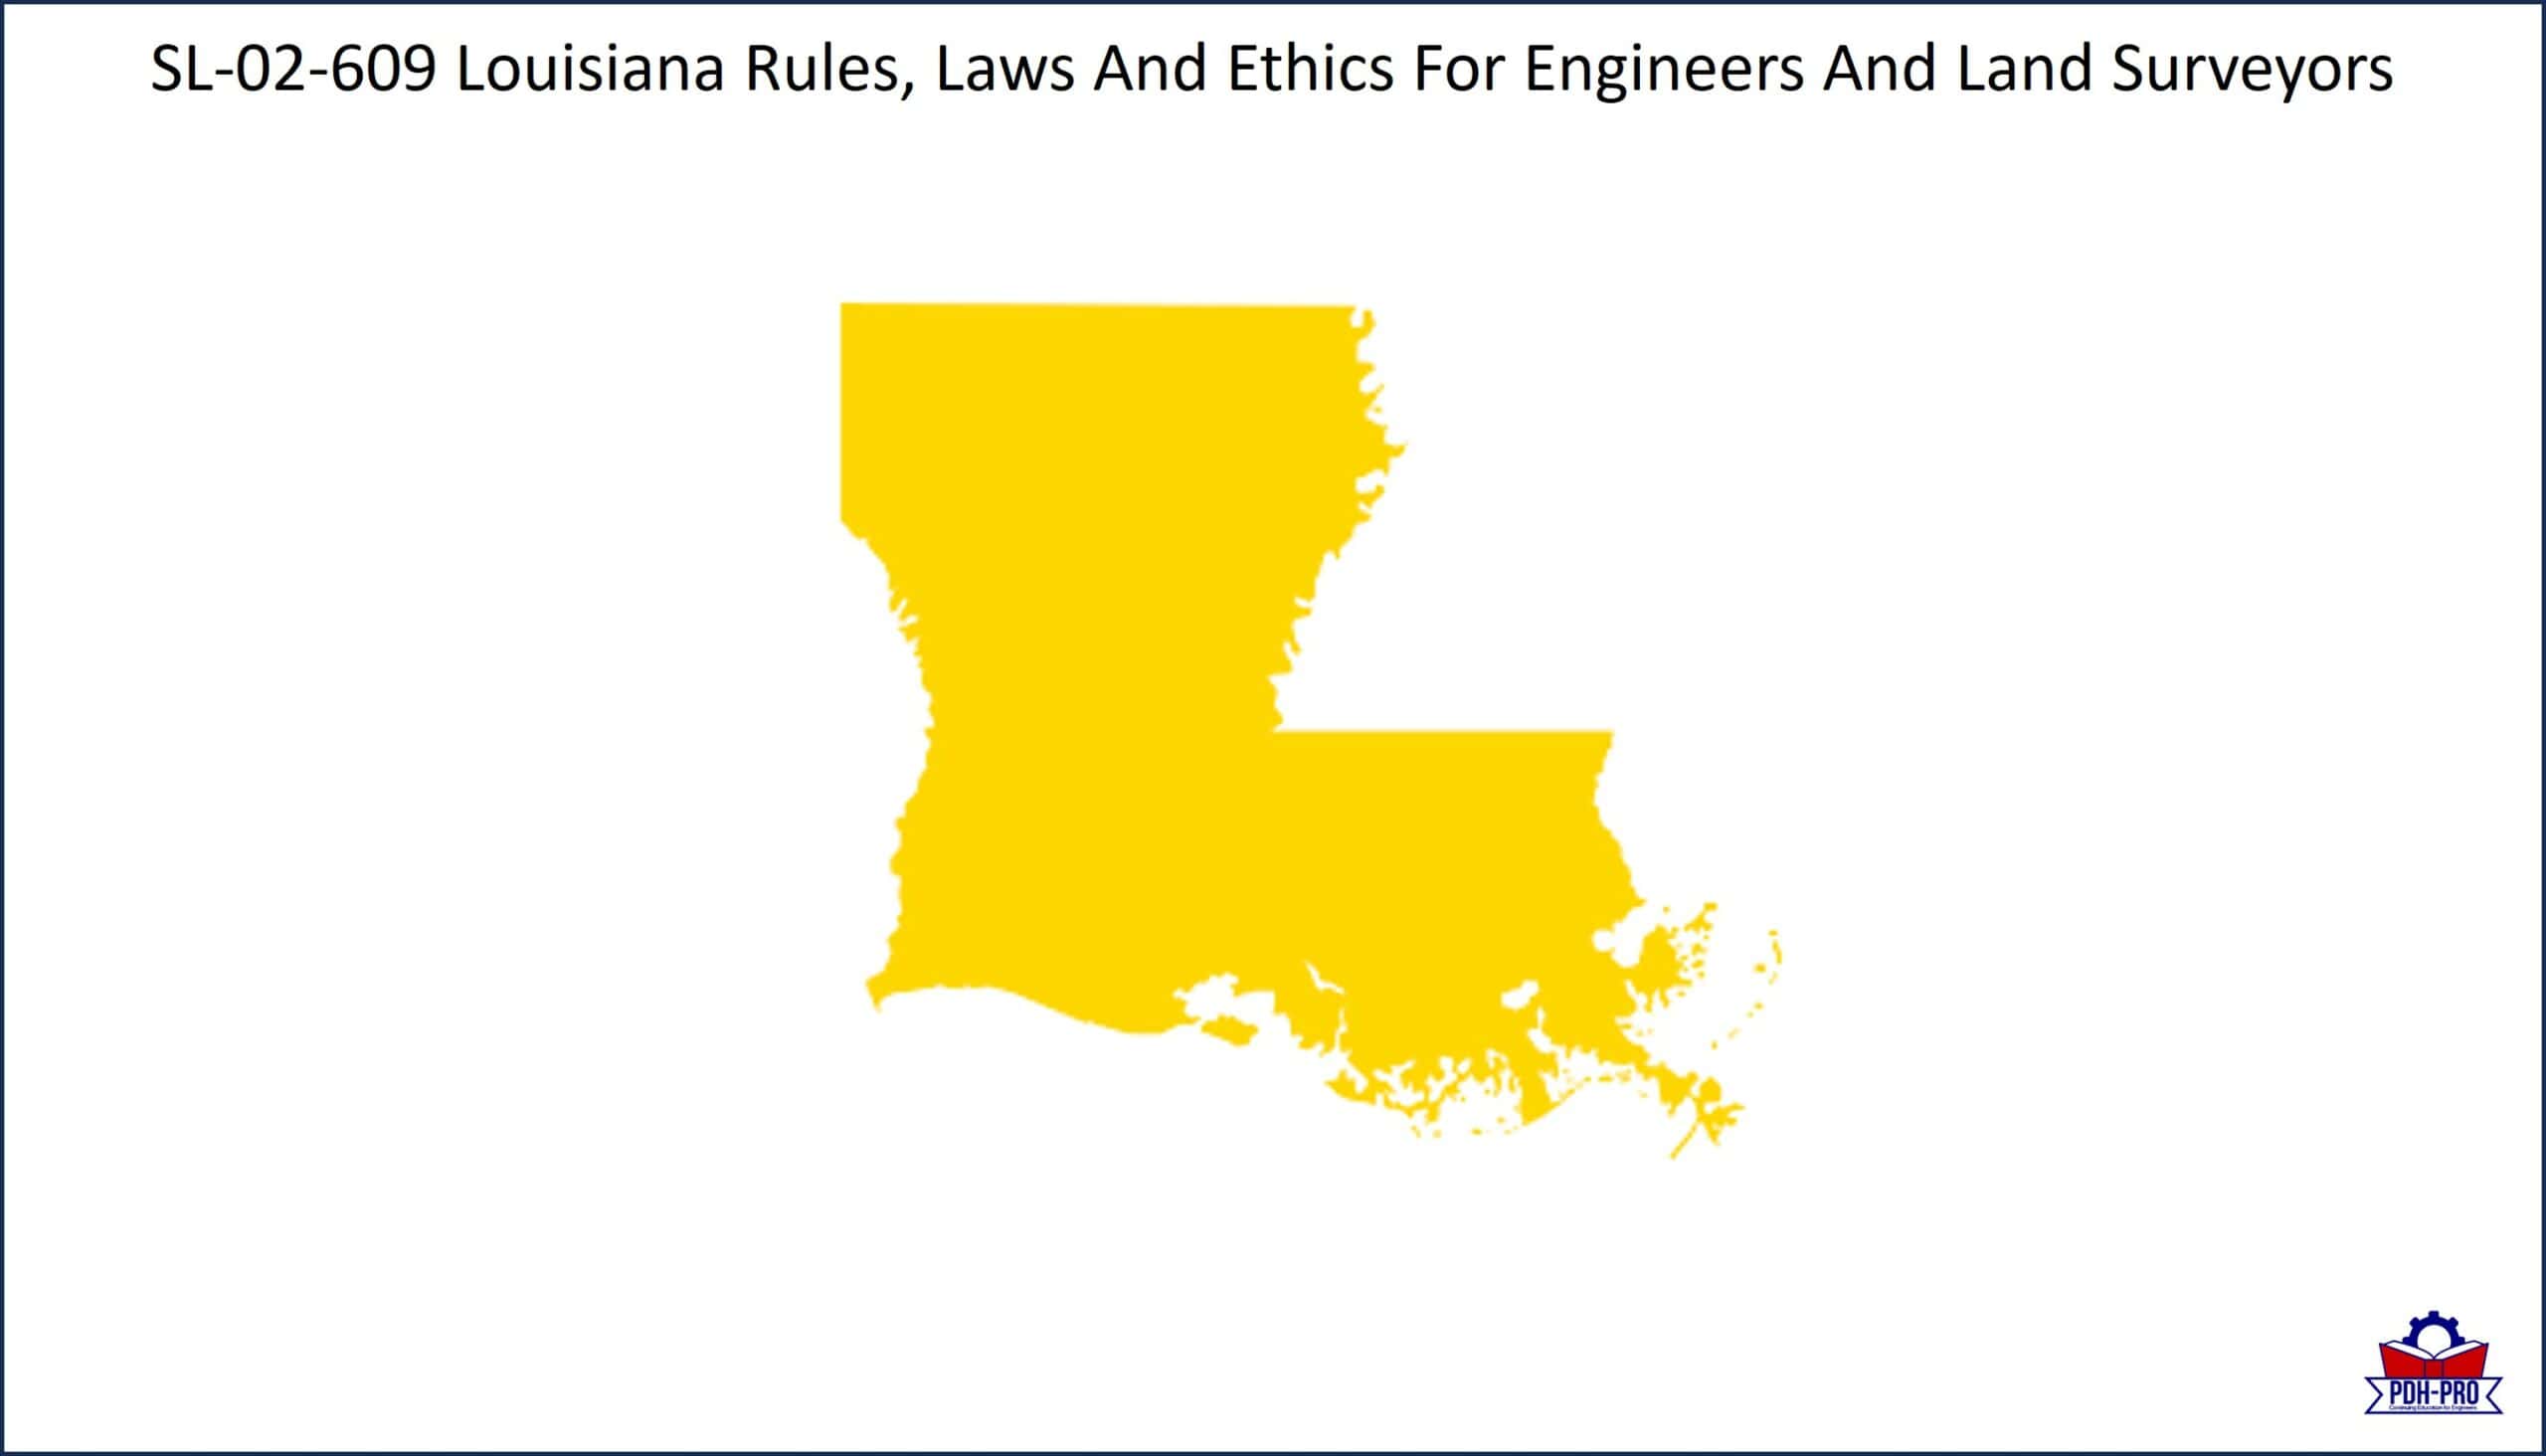 Louisiana Rules, Laws And Ethics For Engineers And Land Surveyors